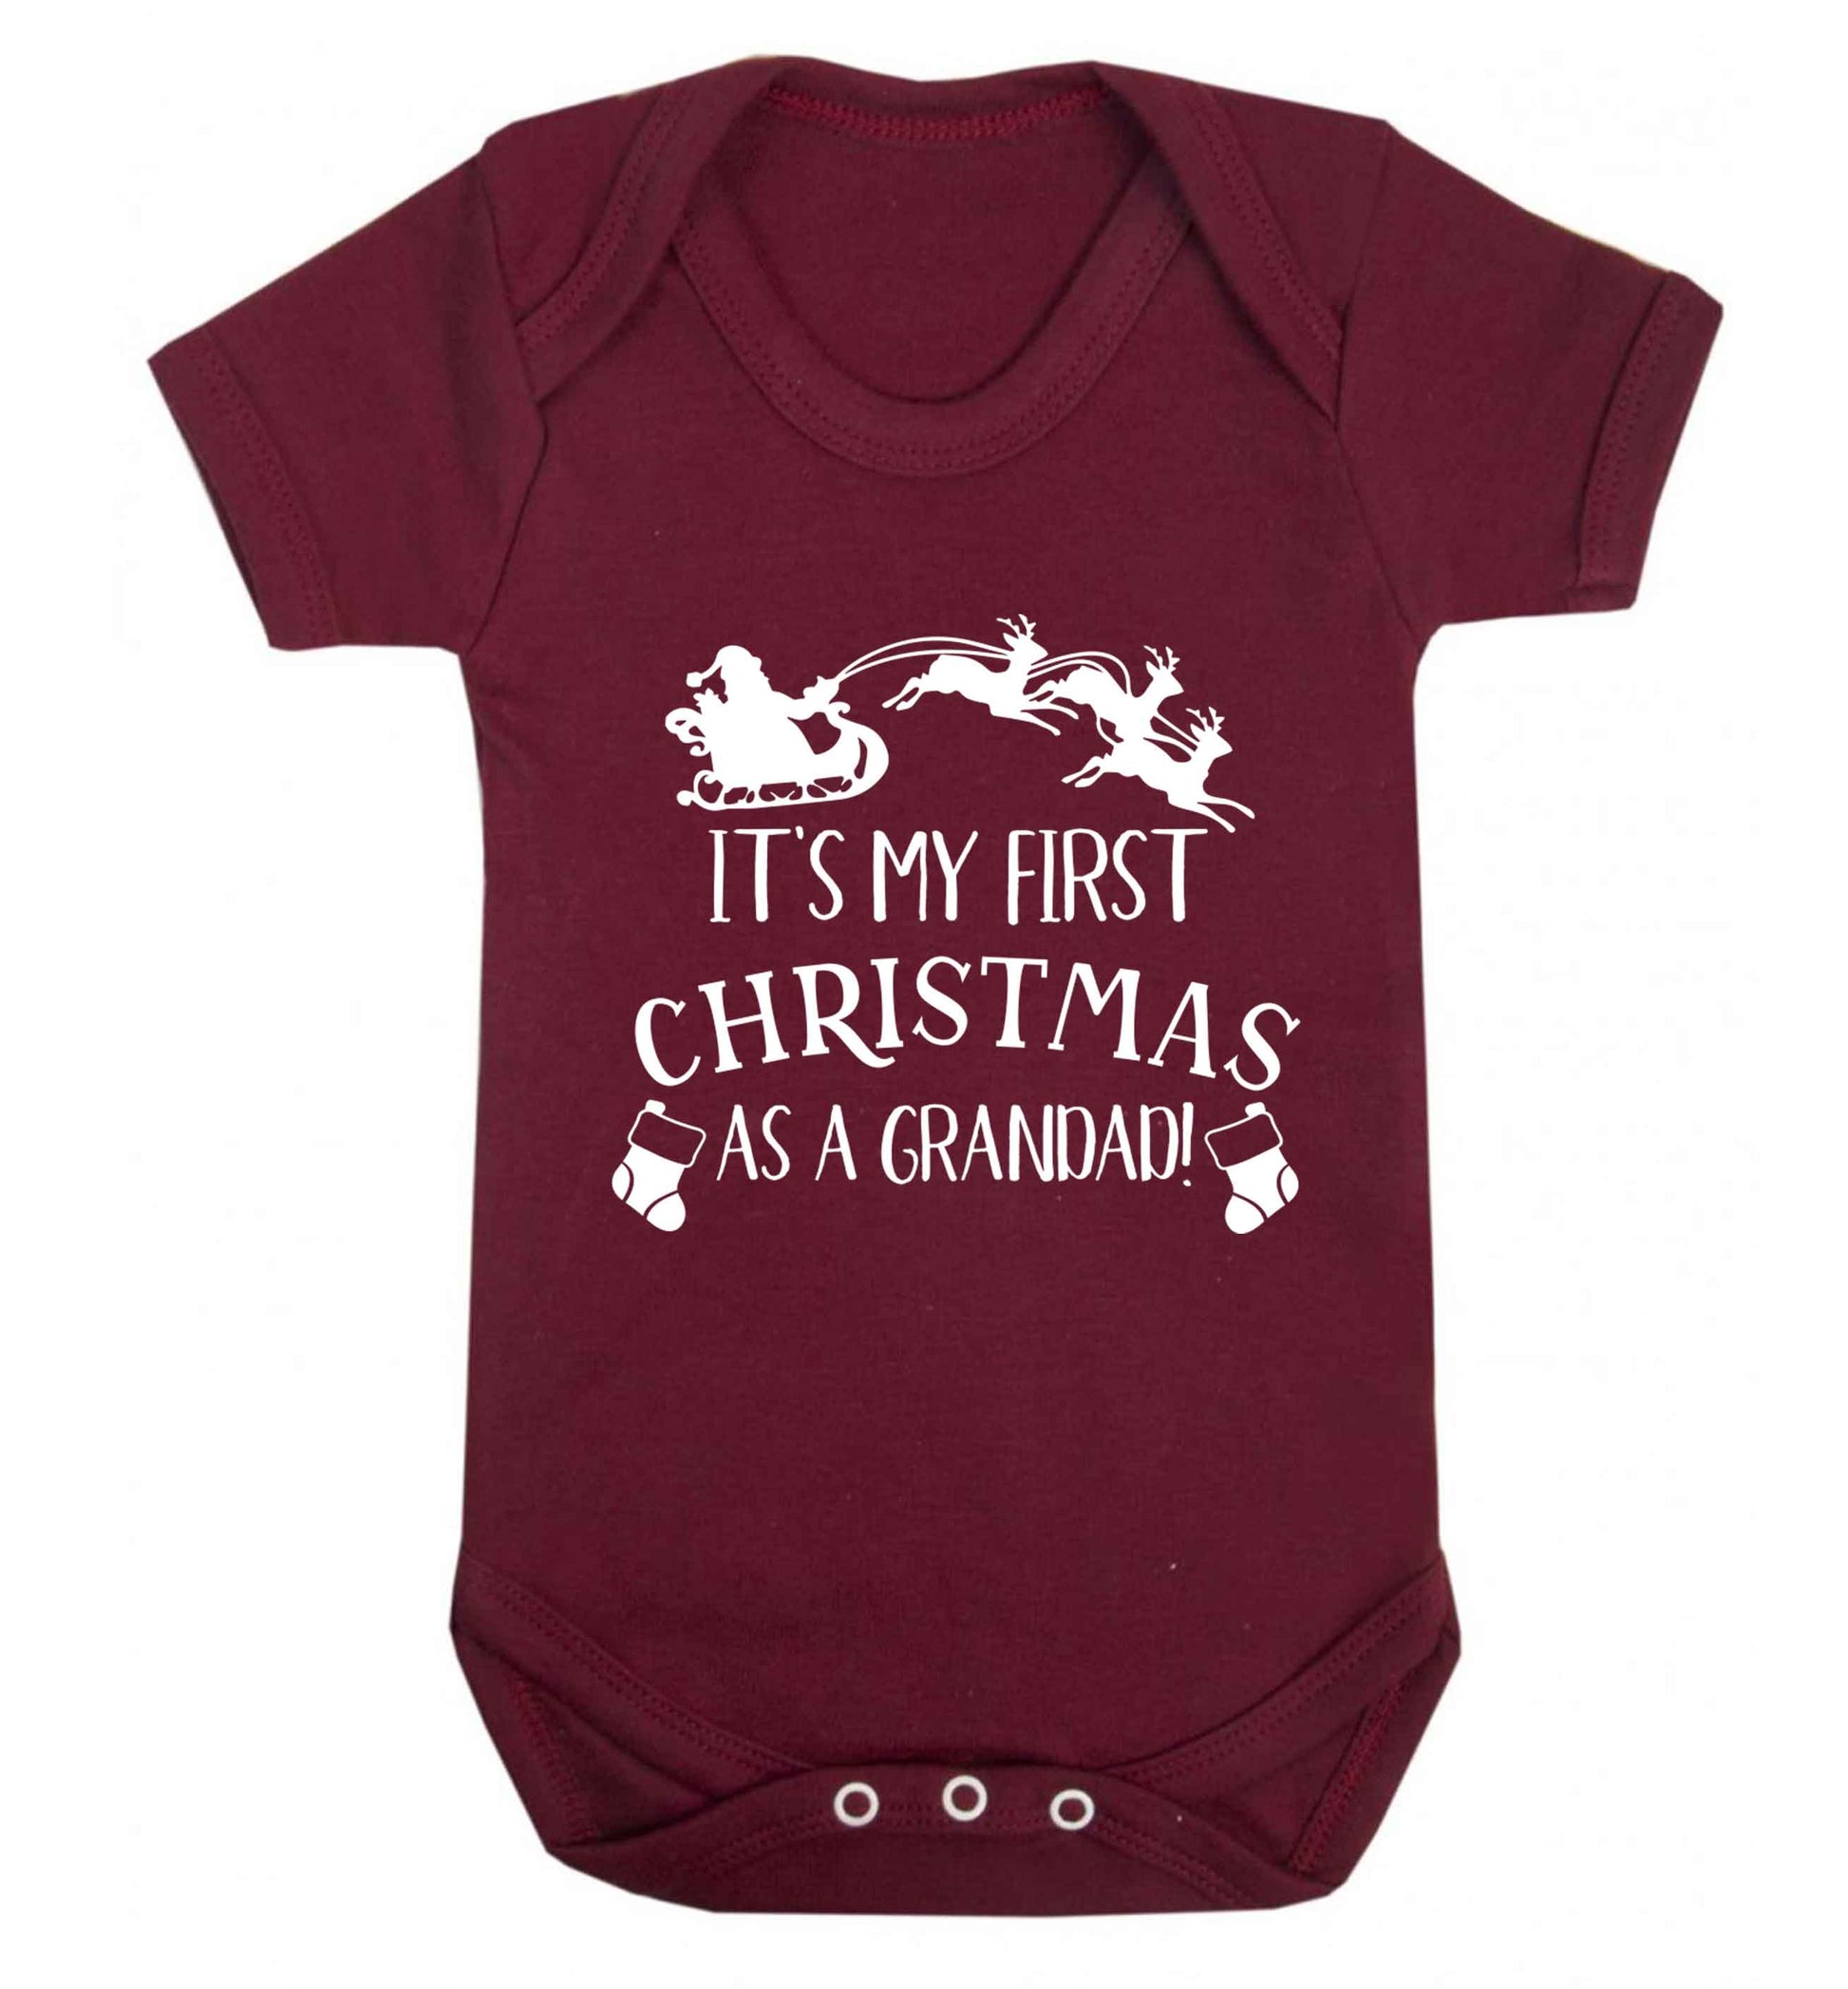 It's my first Christmas as a grandad! Baby Vest maroon 18-24 months